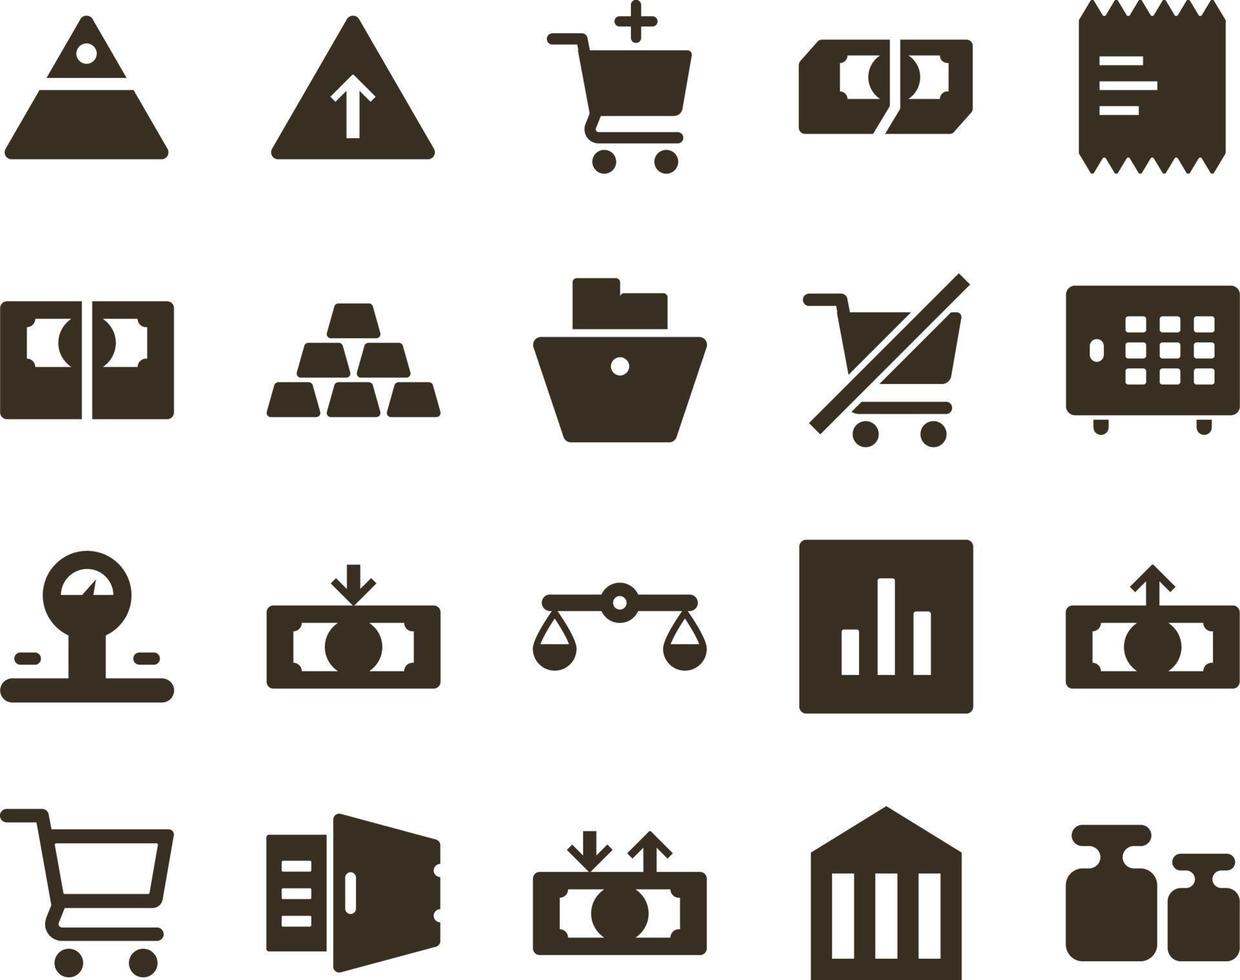 Money and finance icon set, plummet, scales, weight. Investment, banking, money and finance icons on white background vector